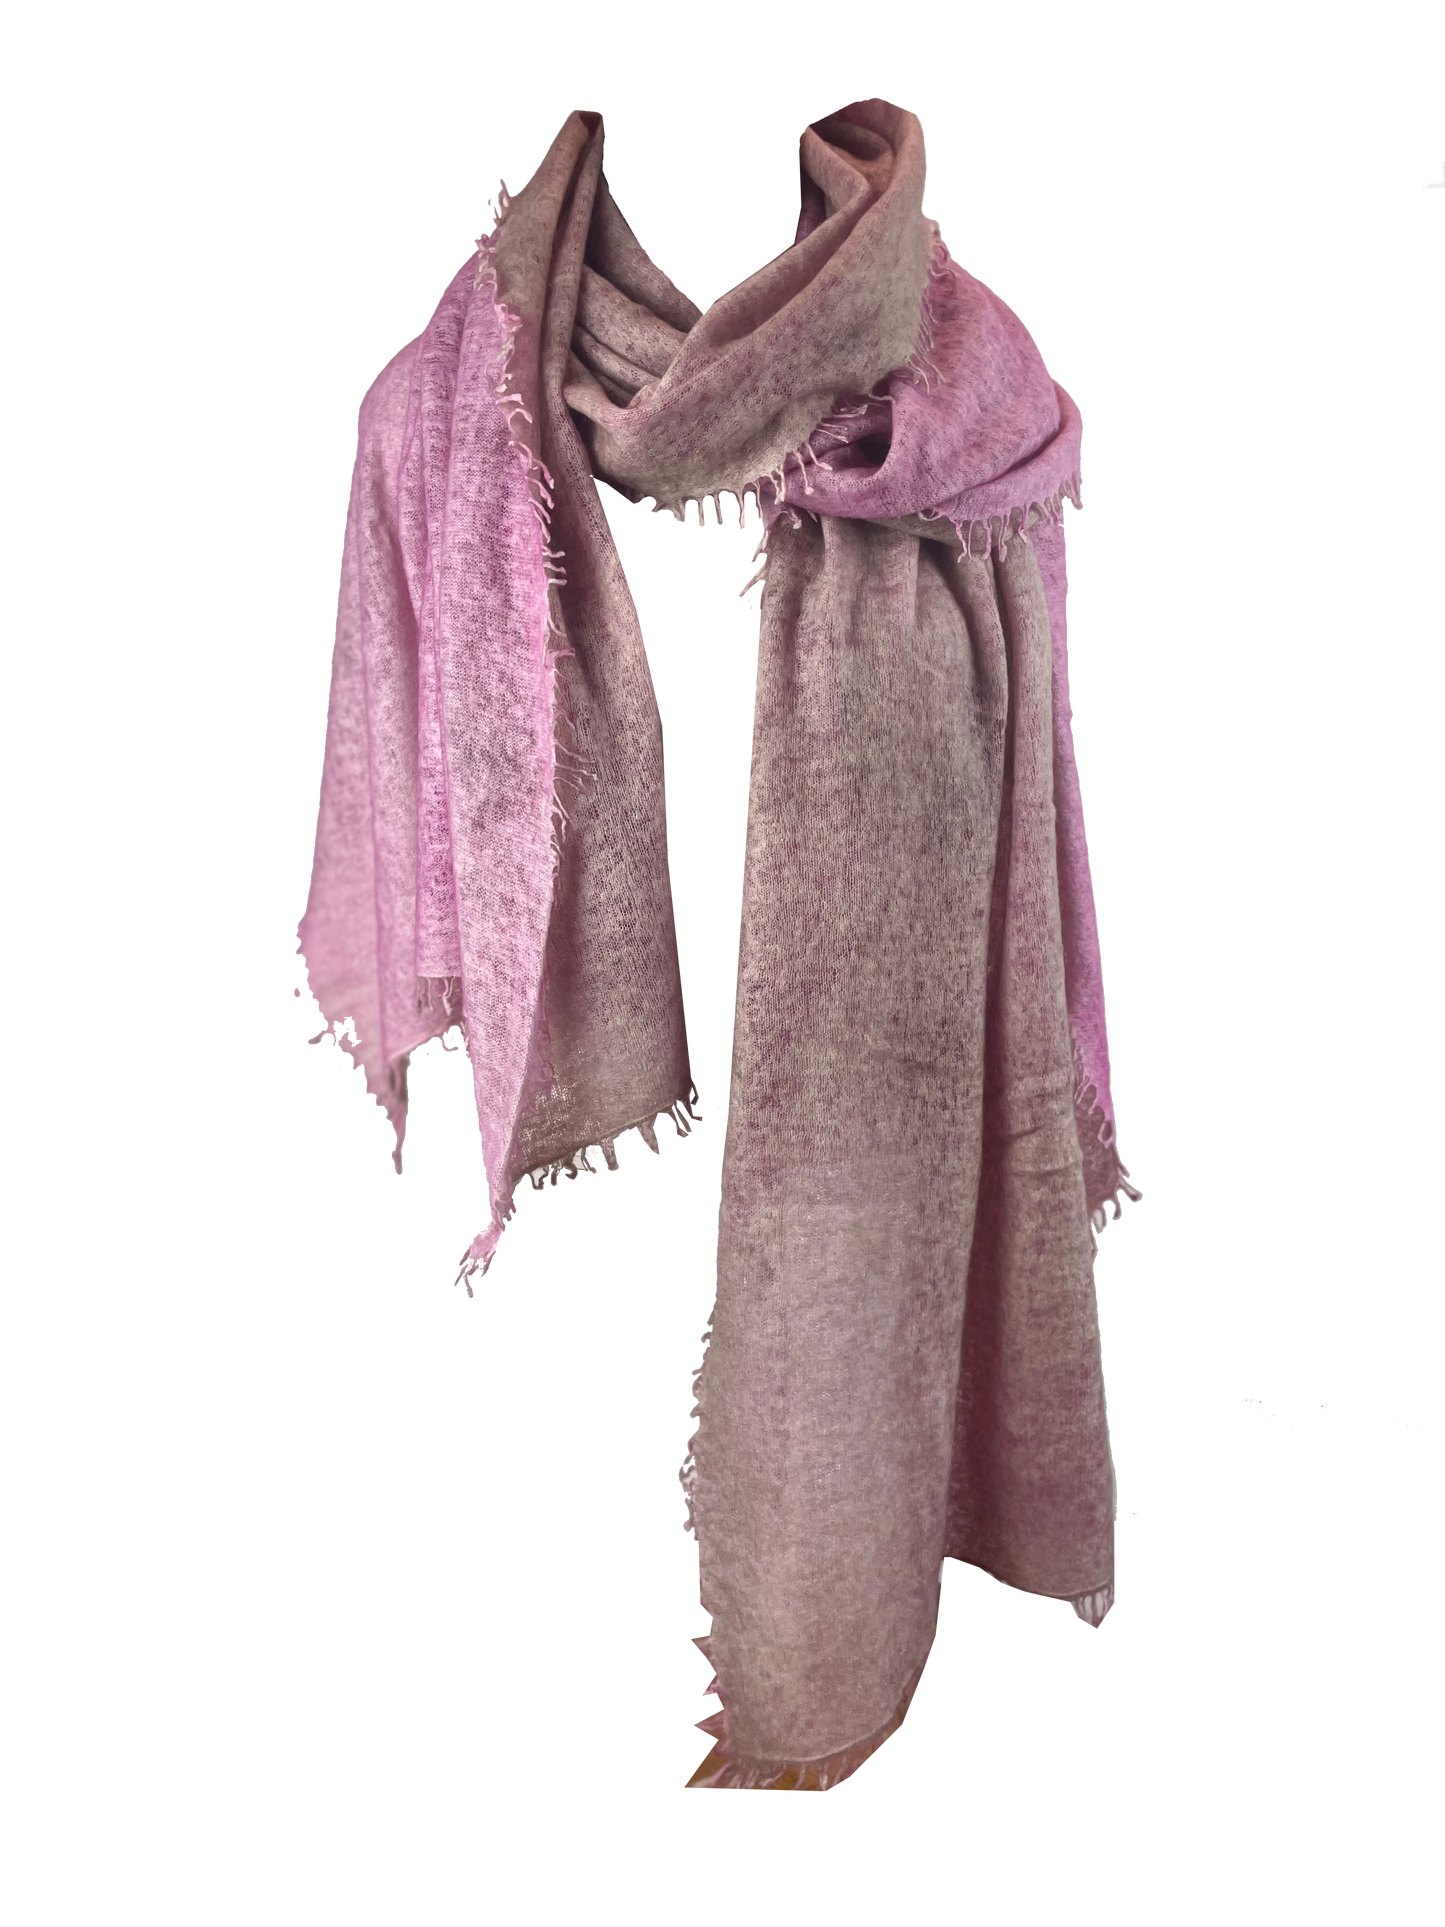 Wrapped cashmere fringed scarf in pink and tan